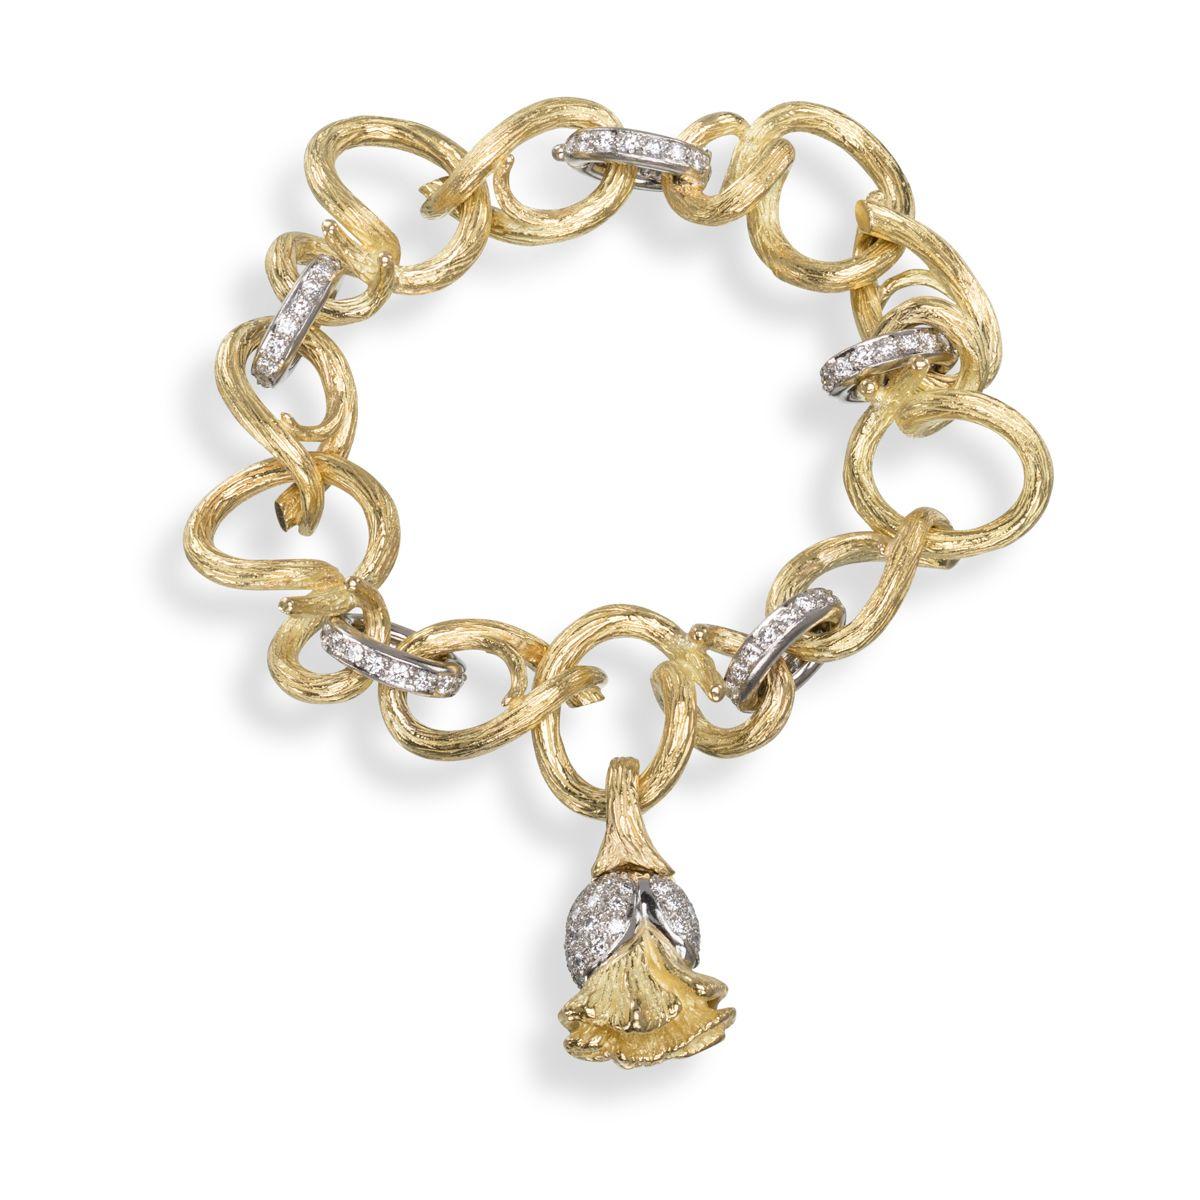 Inspired by Nature, this fascinating piece is part of the Poppy collection. The textured intertwining links in 18k yellow gold create a vine-like landscape from which the Poppy bud blooms in platinum and gold. Platinum bands with shimmering diamonds